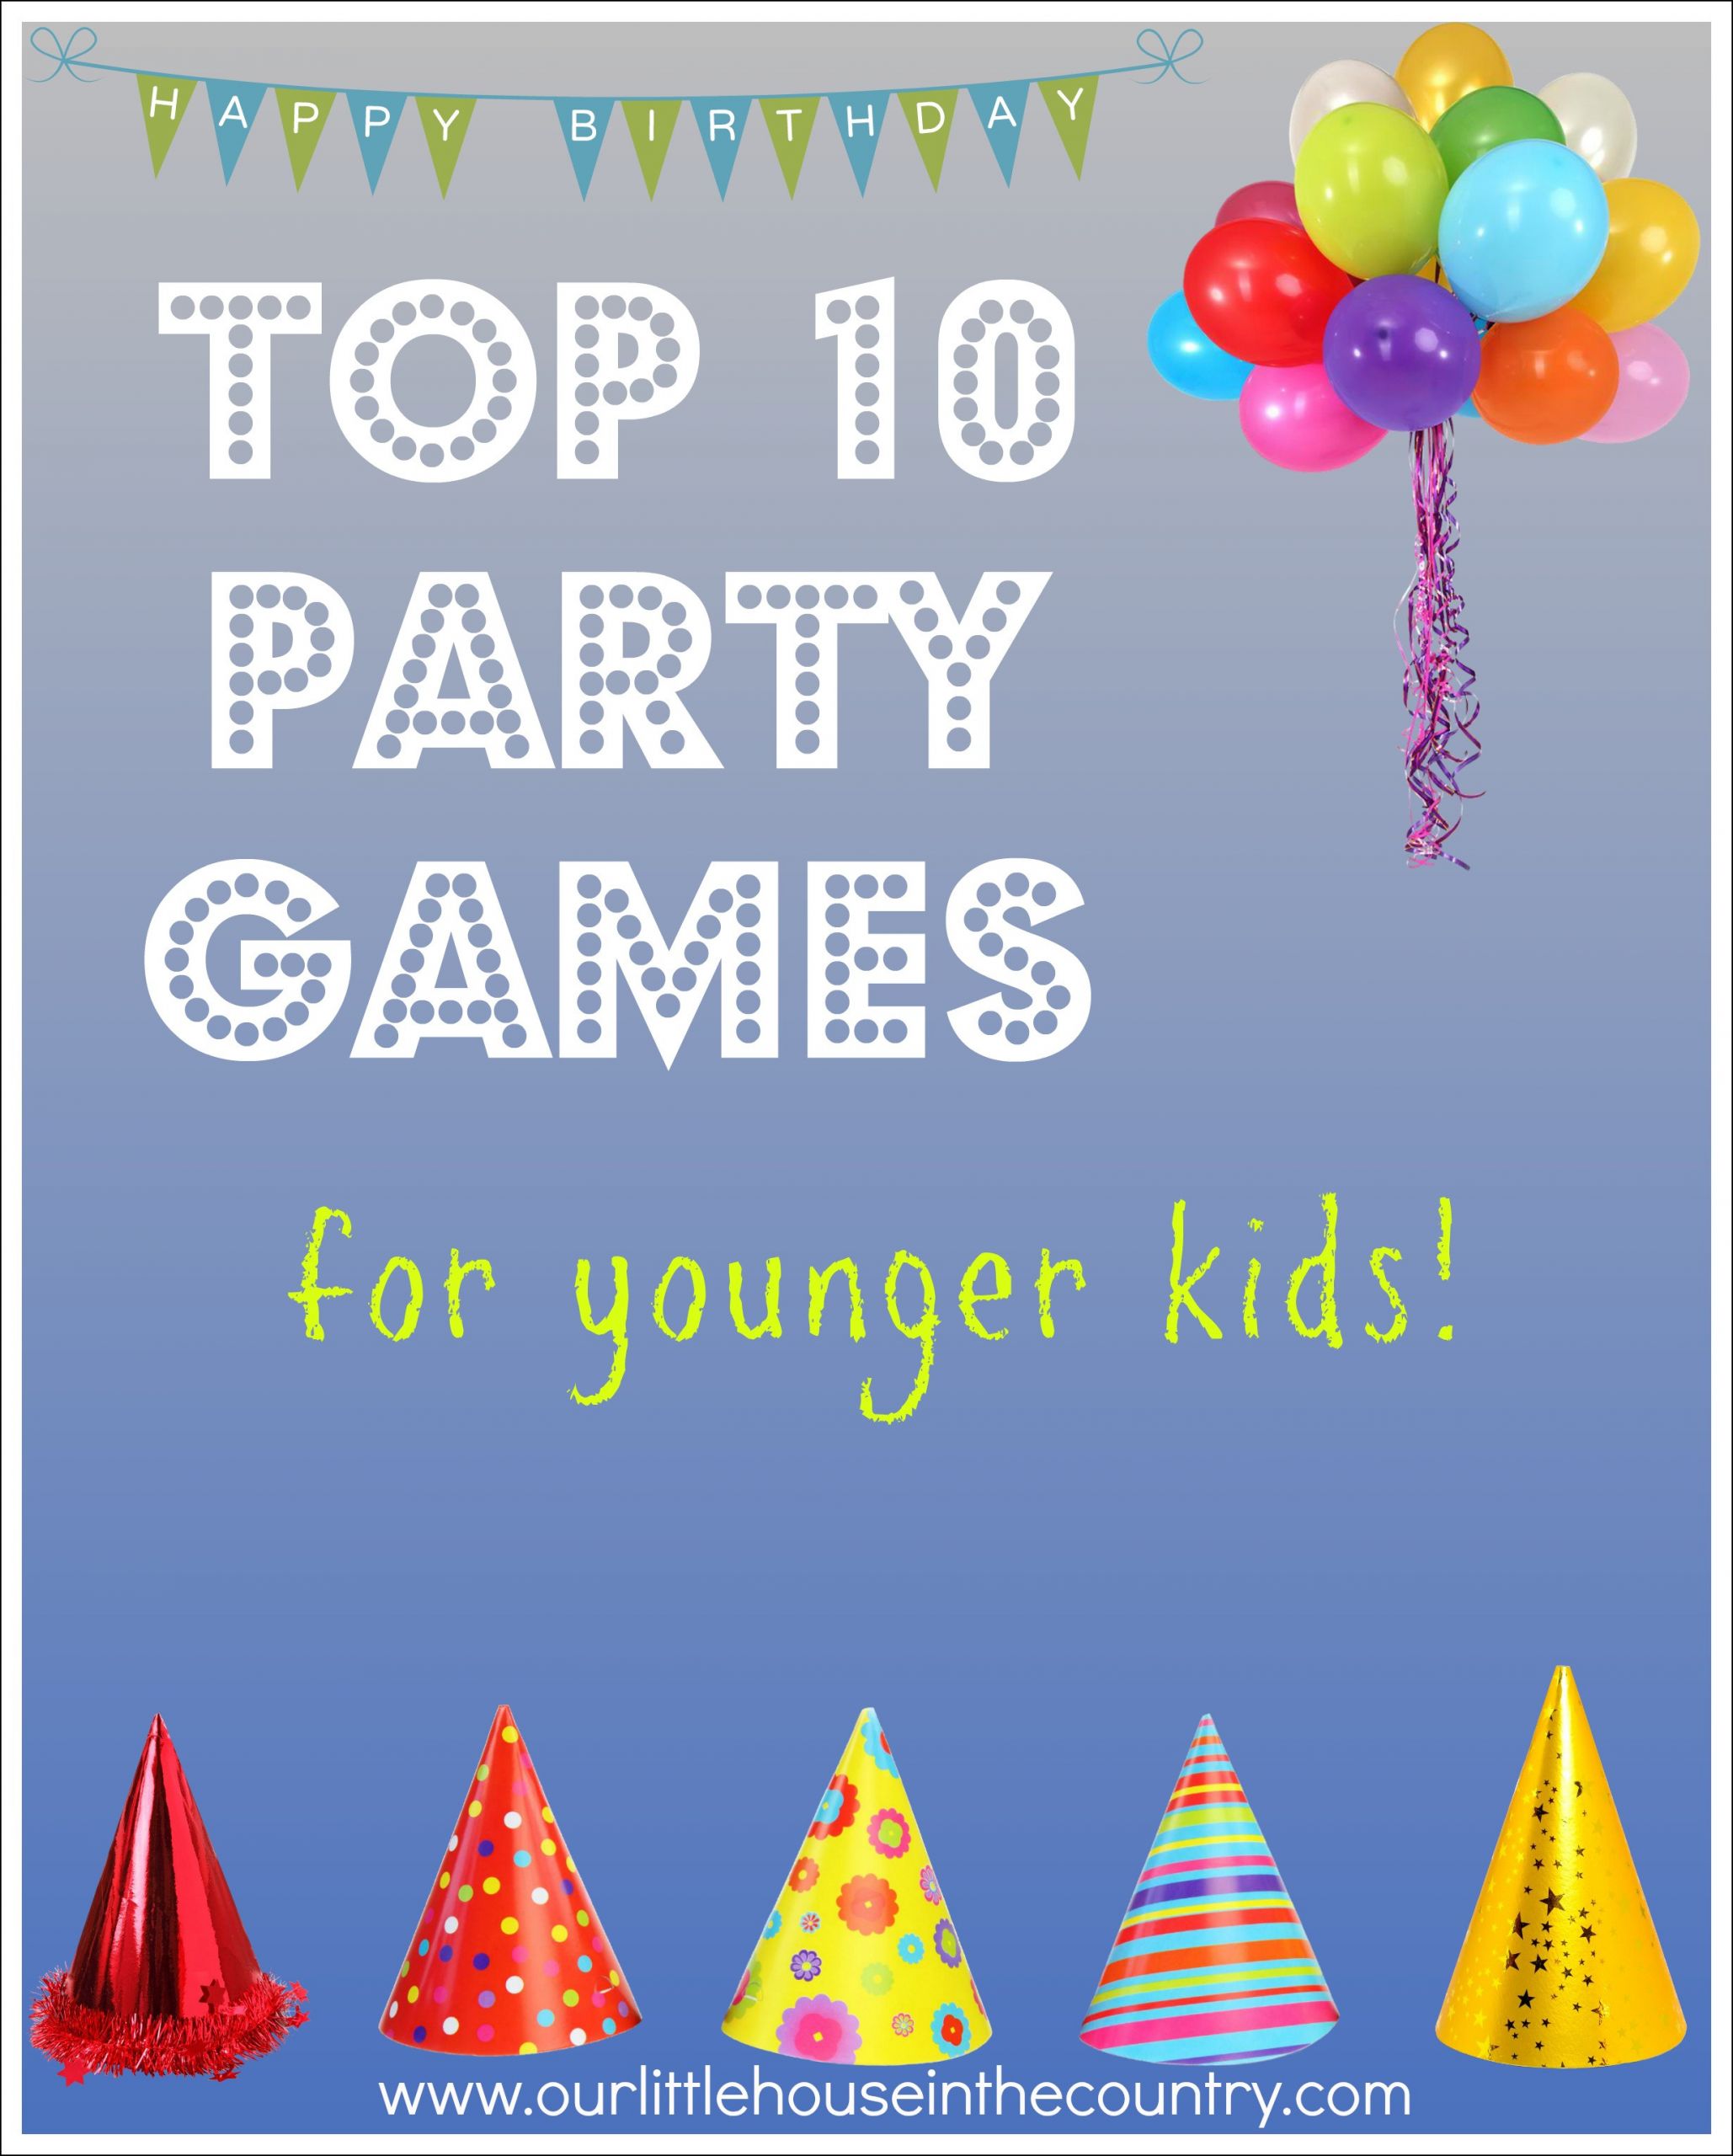 Party Games For Little Kids
 Top 10 Party Games – for younger kids